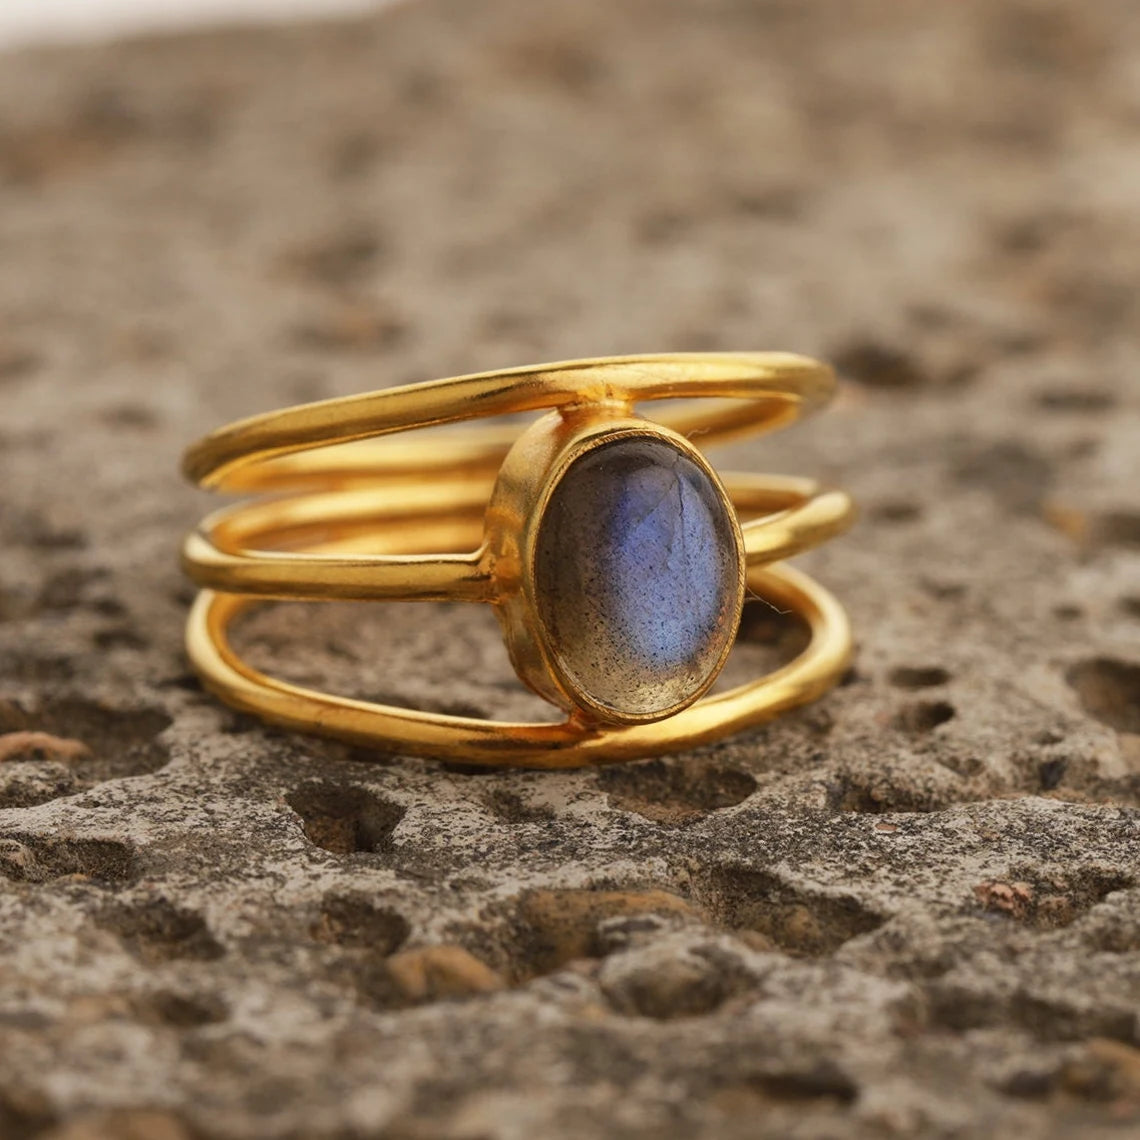 Oval Labradorite Gemstone - Sterling Silver Gold Plated Ring